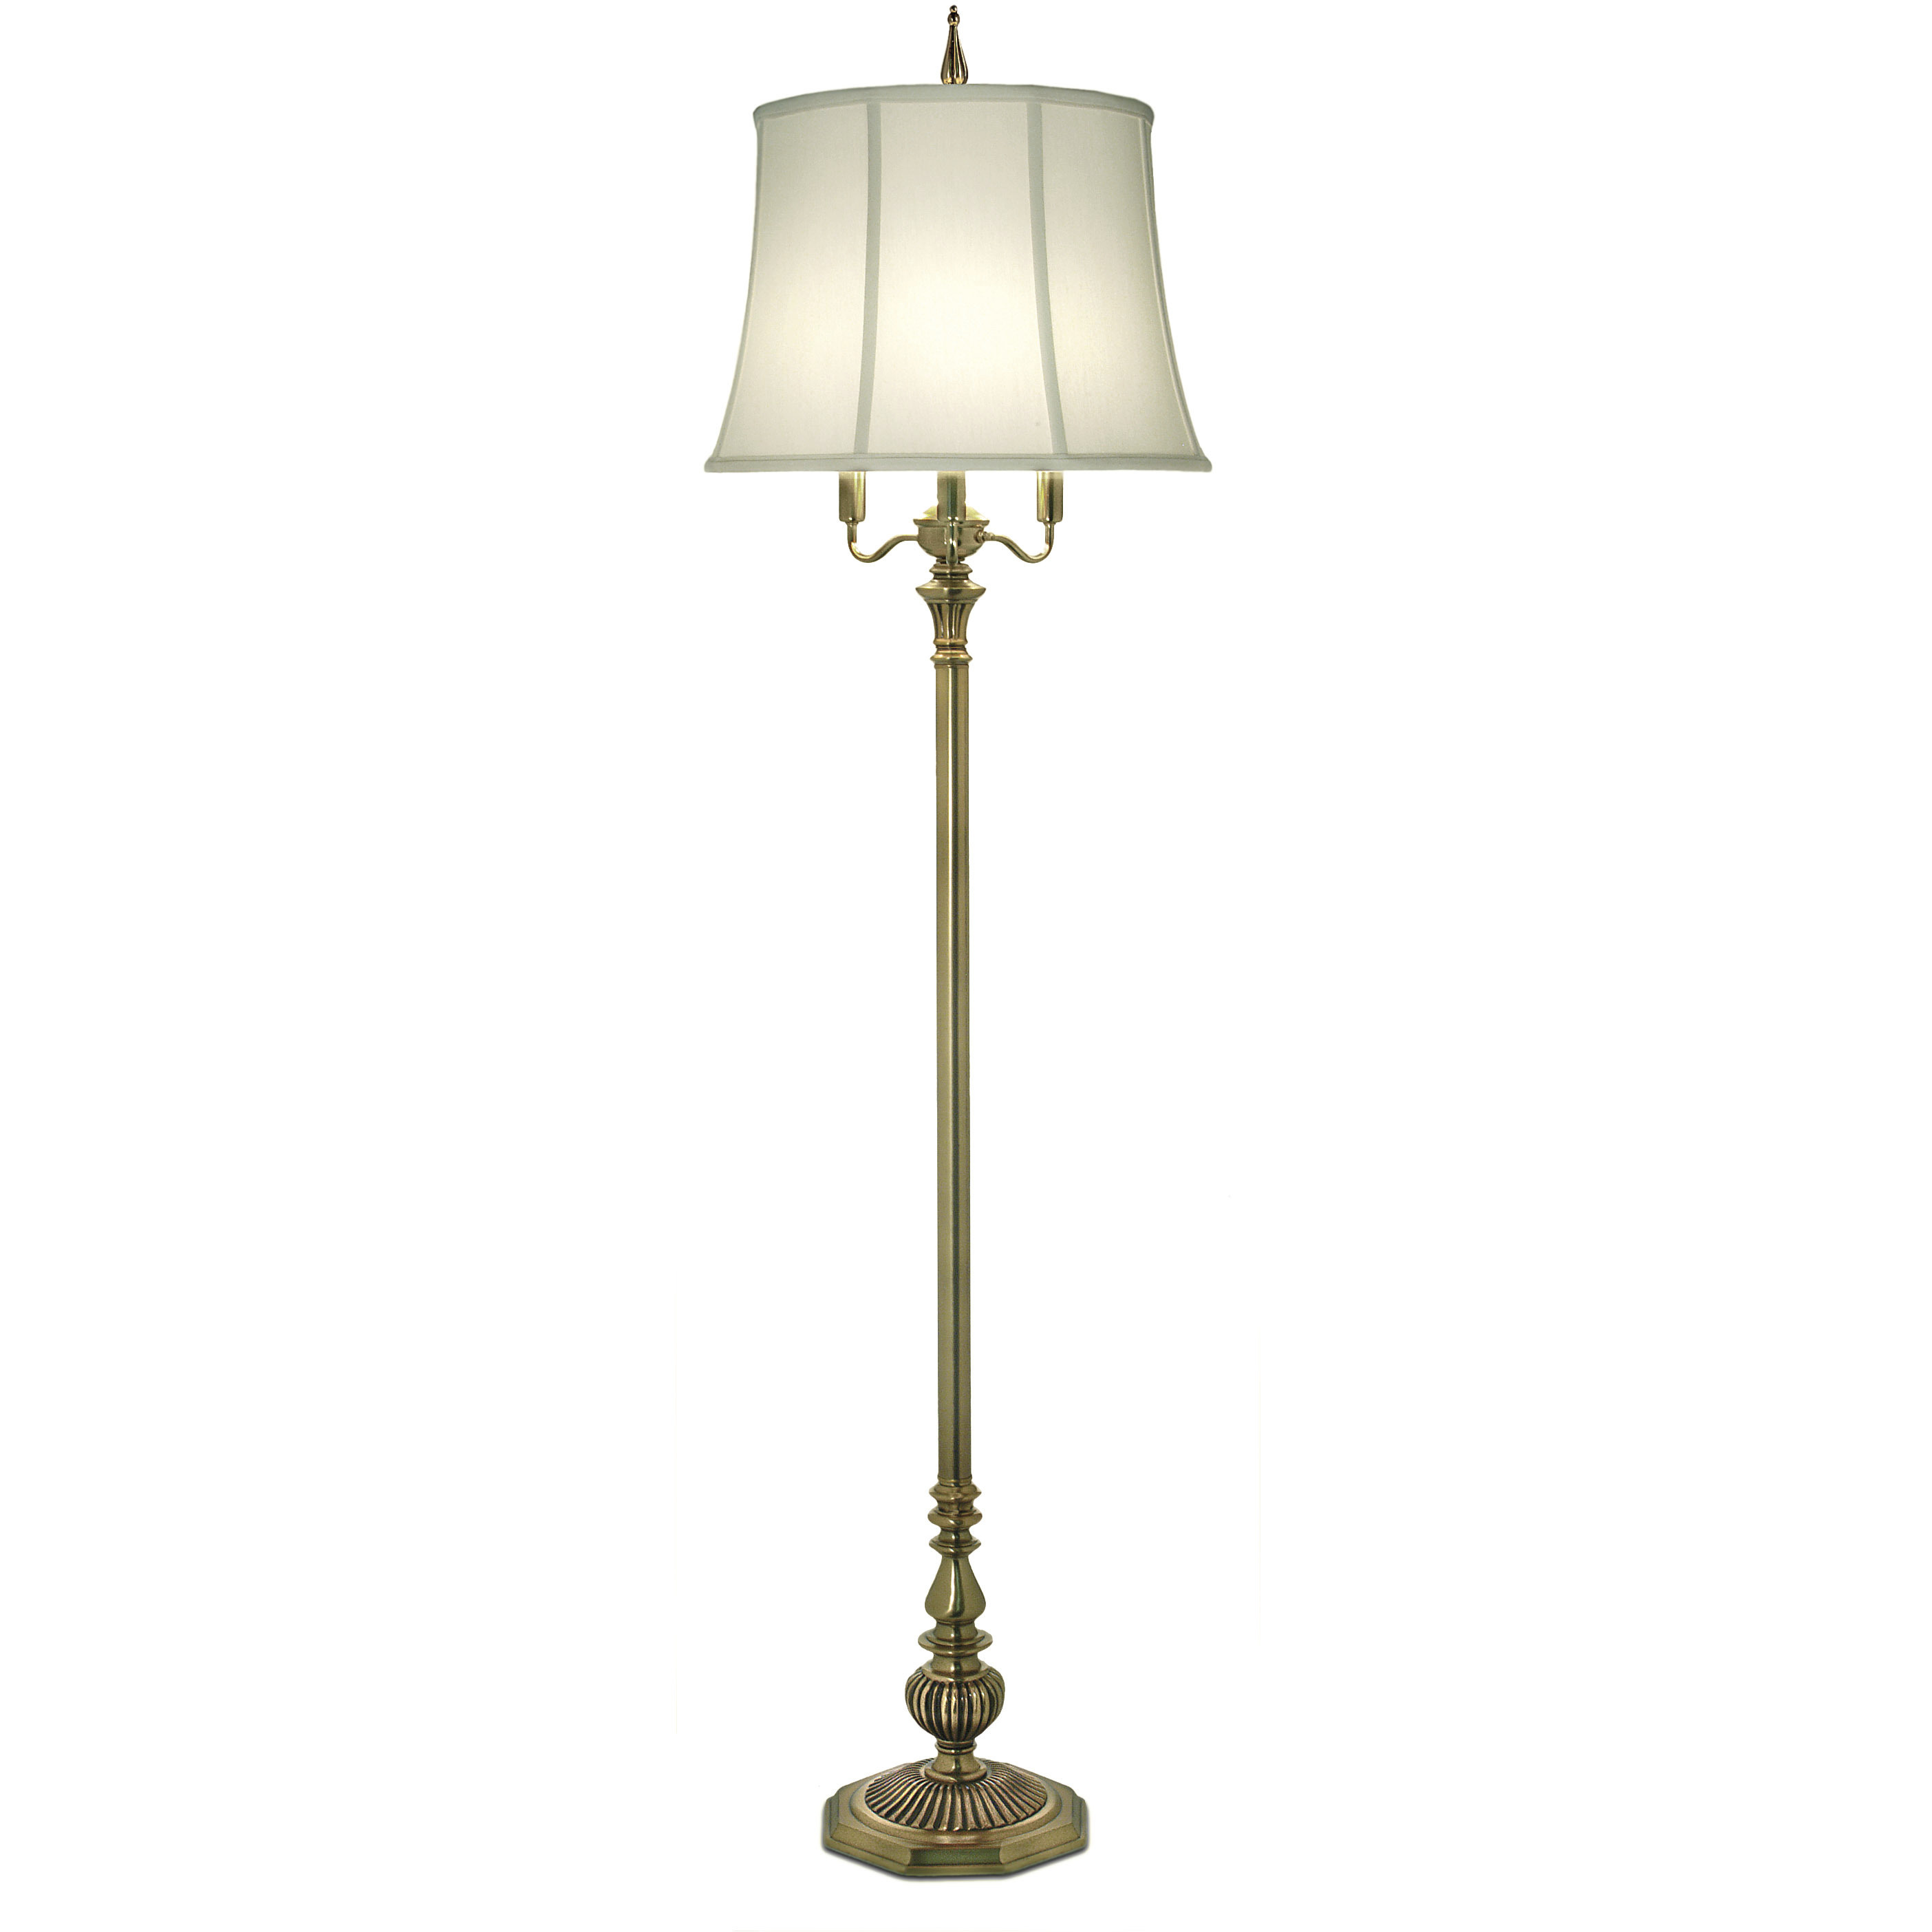 Stiffel Ivory Shadow Shade 31 High Antique Brass Table Lamp